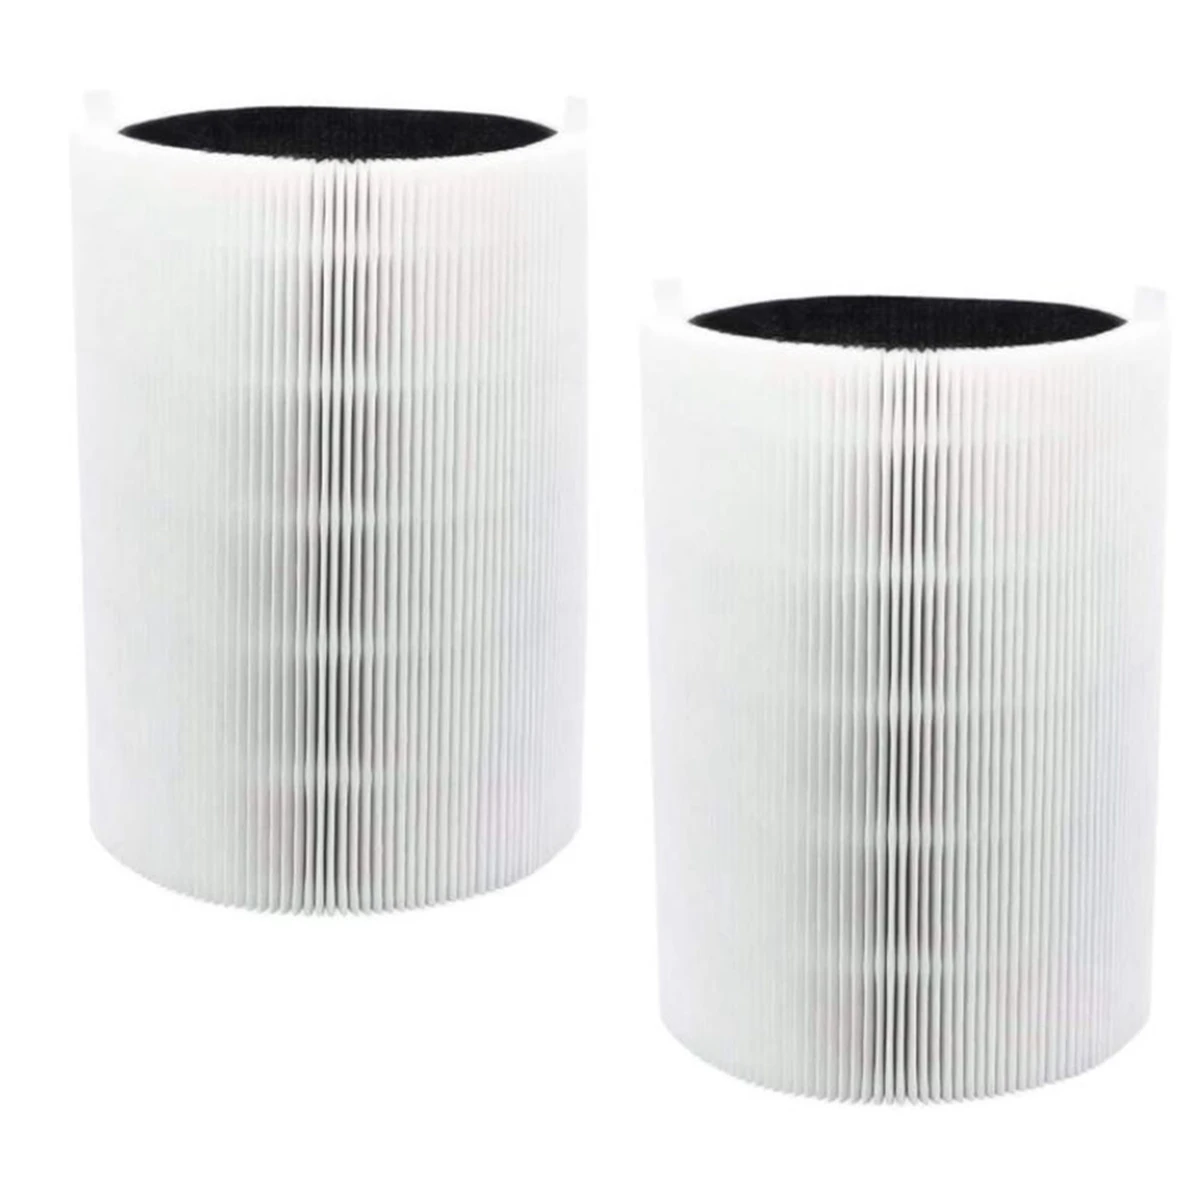 

2 Pcs Replacement Filter for Blueair Blue Pure 411,411+ & Mini Air Purifier,HEPA & Activated Carbon Composite Filter